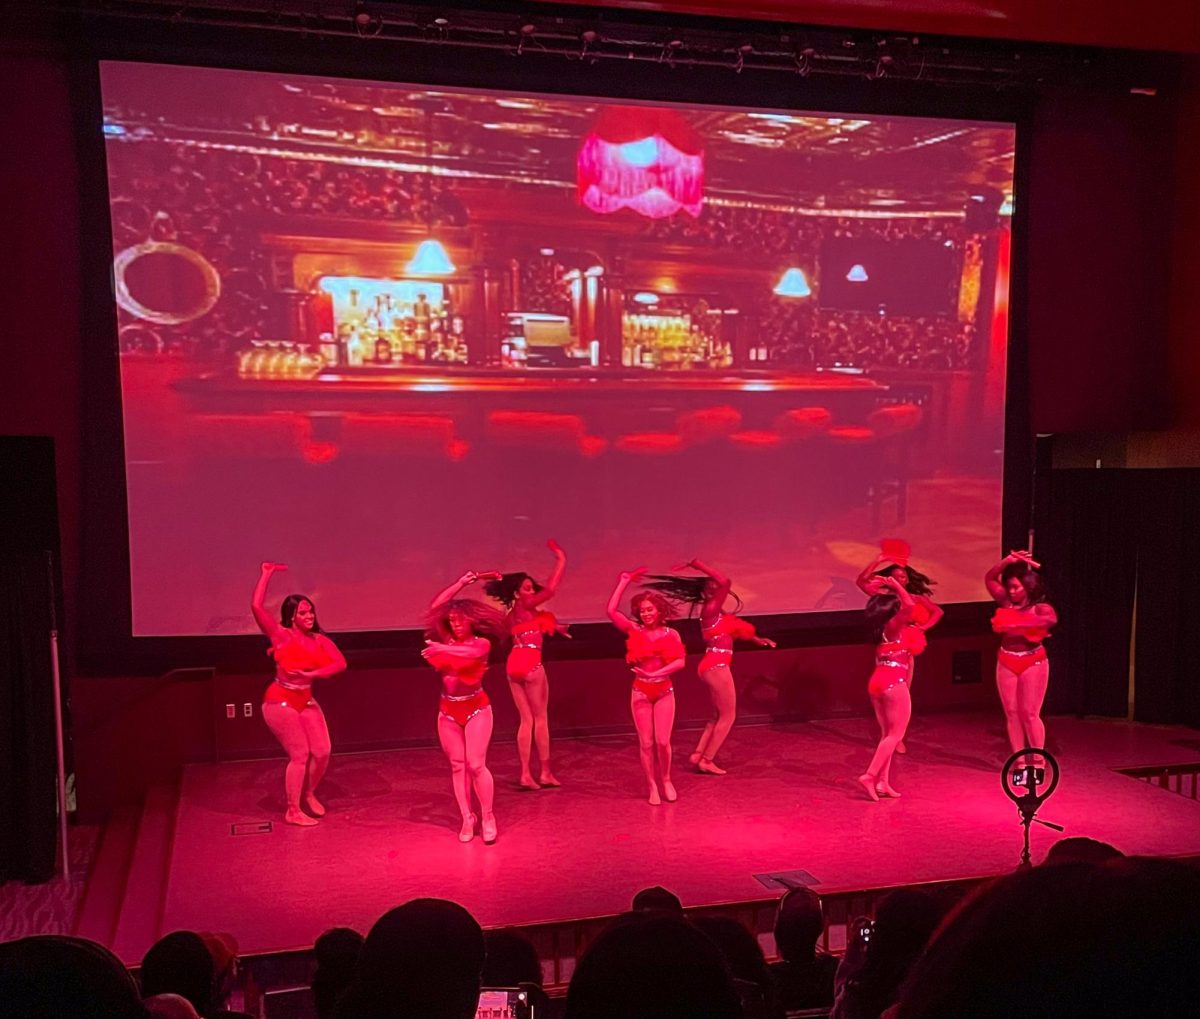 The Diamonds performed a Burlesque number as part of their showcase